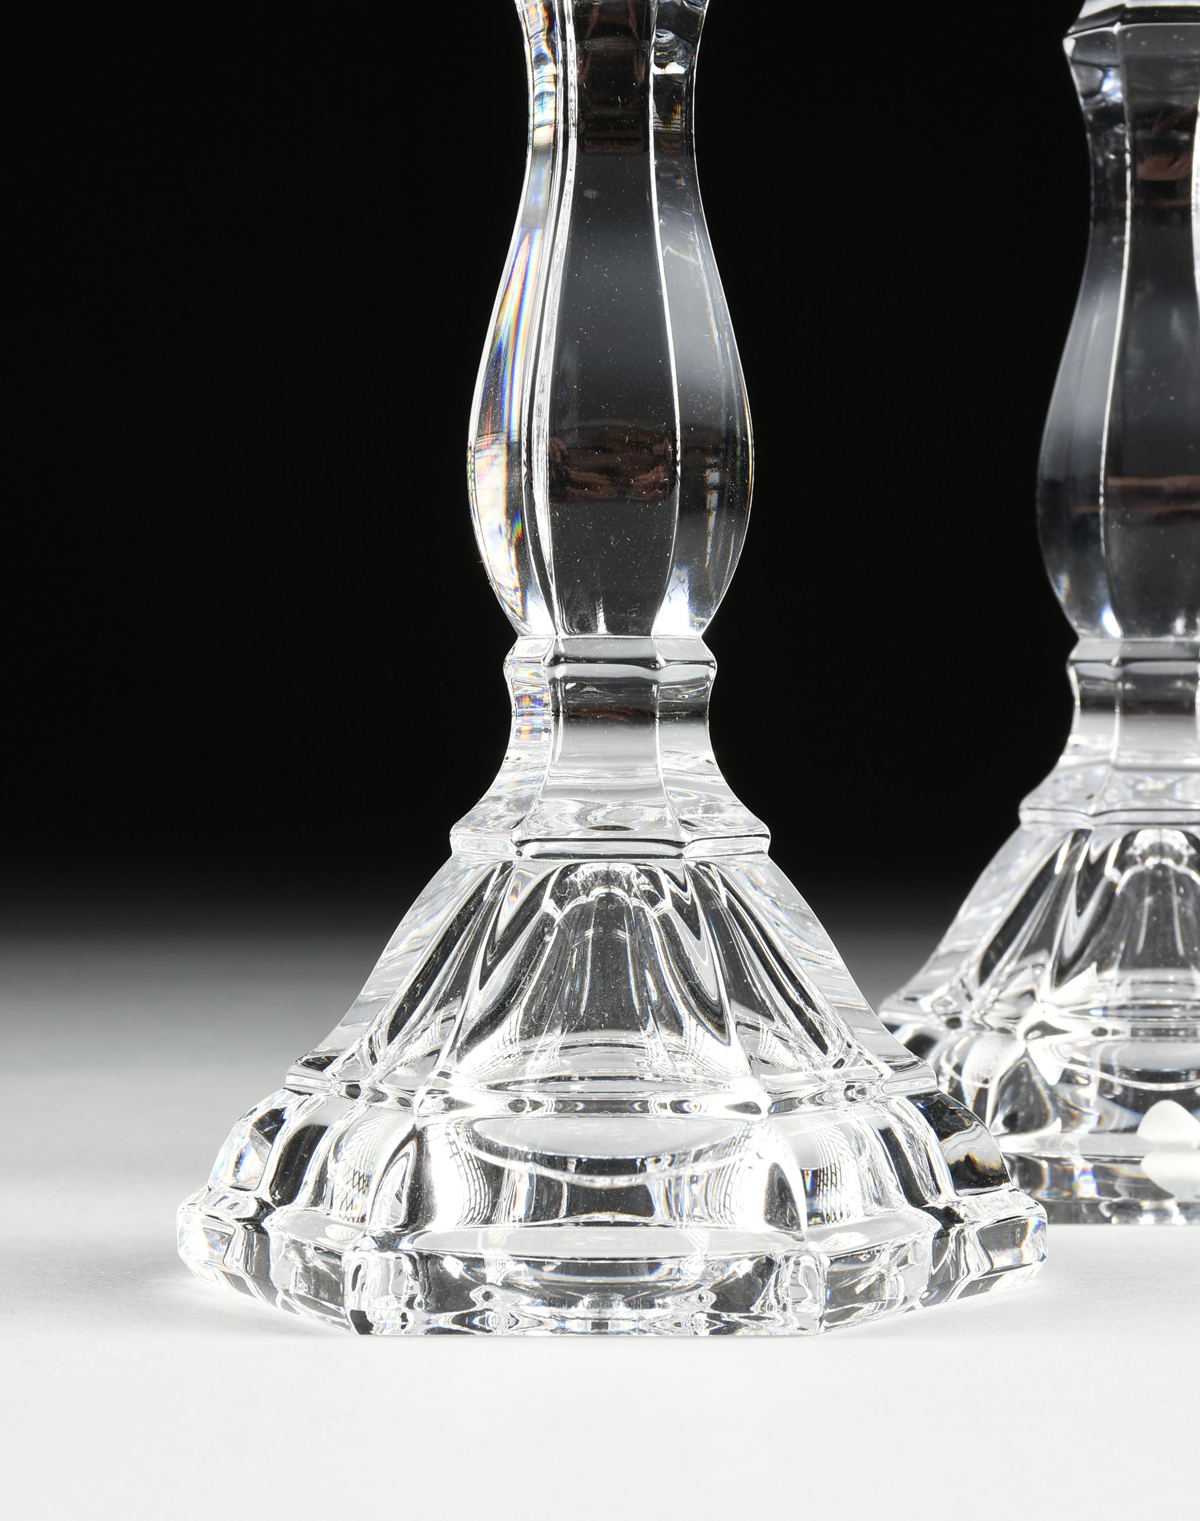 A PAIR OF TIFFANY & CO. CRYSTAL "HAMPTON" CANDLESTICKS AND A TIFFANY & CO CRYSTAL ICE BUCKET, - Image 3 of 6